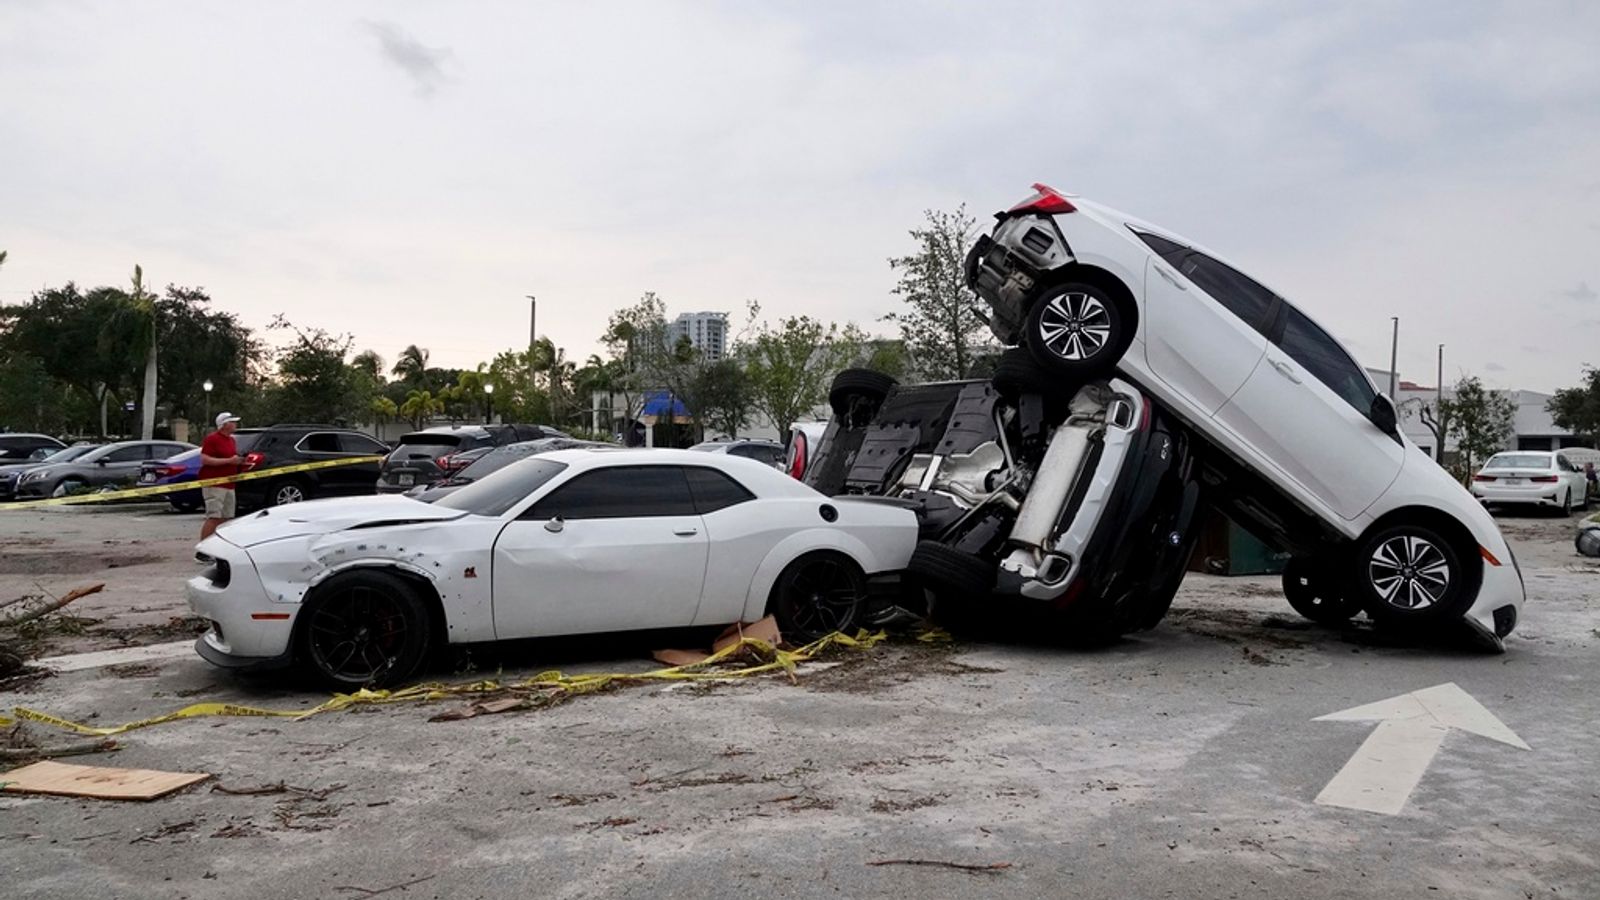 Palm Beach Tornado: Wind flips cars and damages homes in coastal Florida city